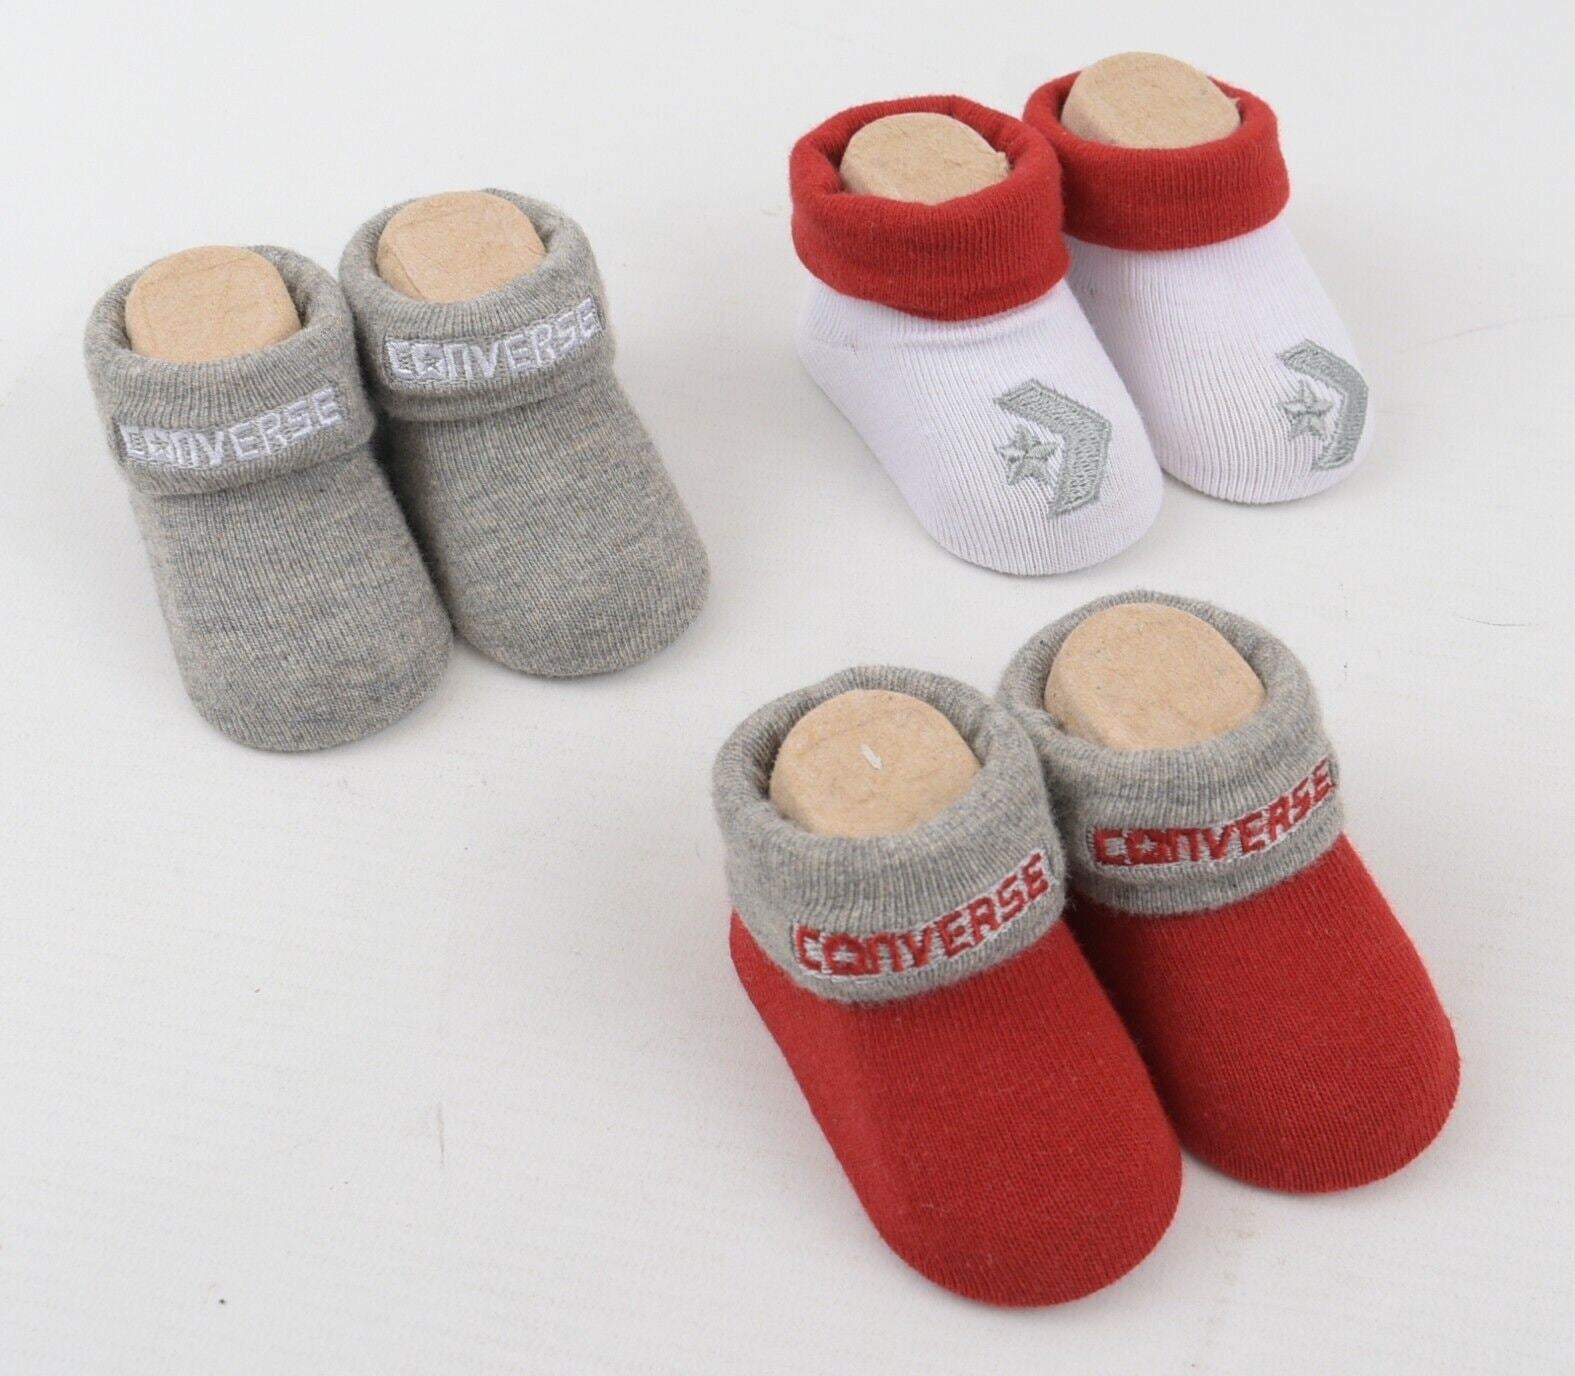 CONVERSE Baby Girls' Boys' 3-pack Sock Booties, Red/White/Grey, 0-6 months